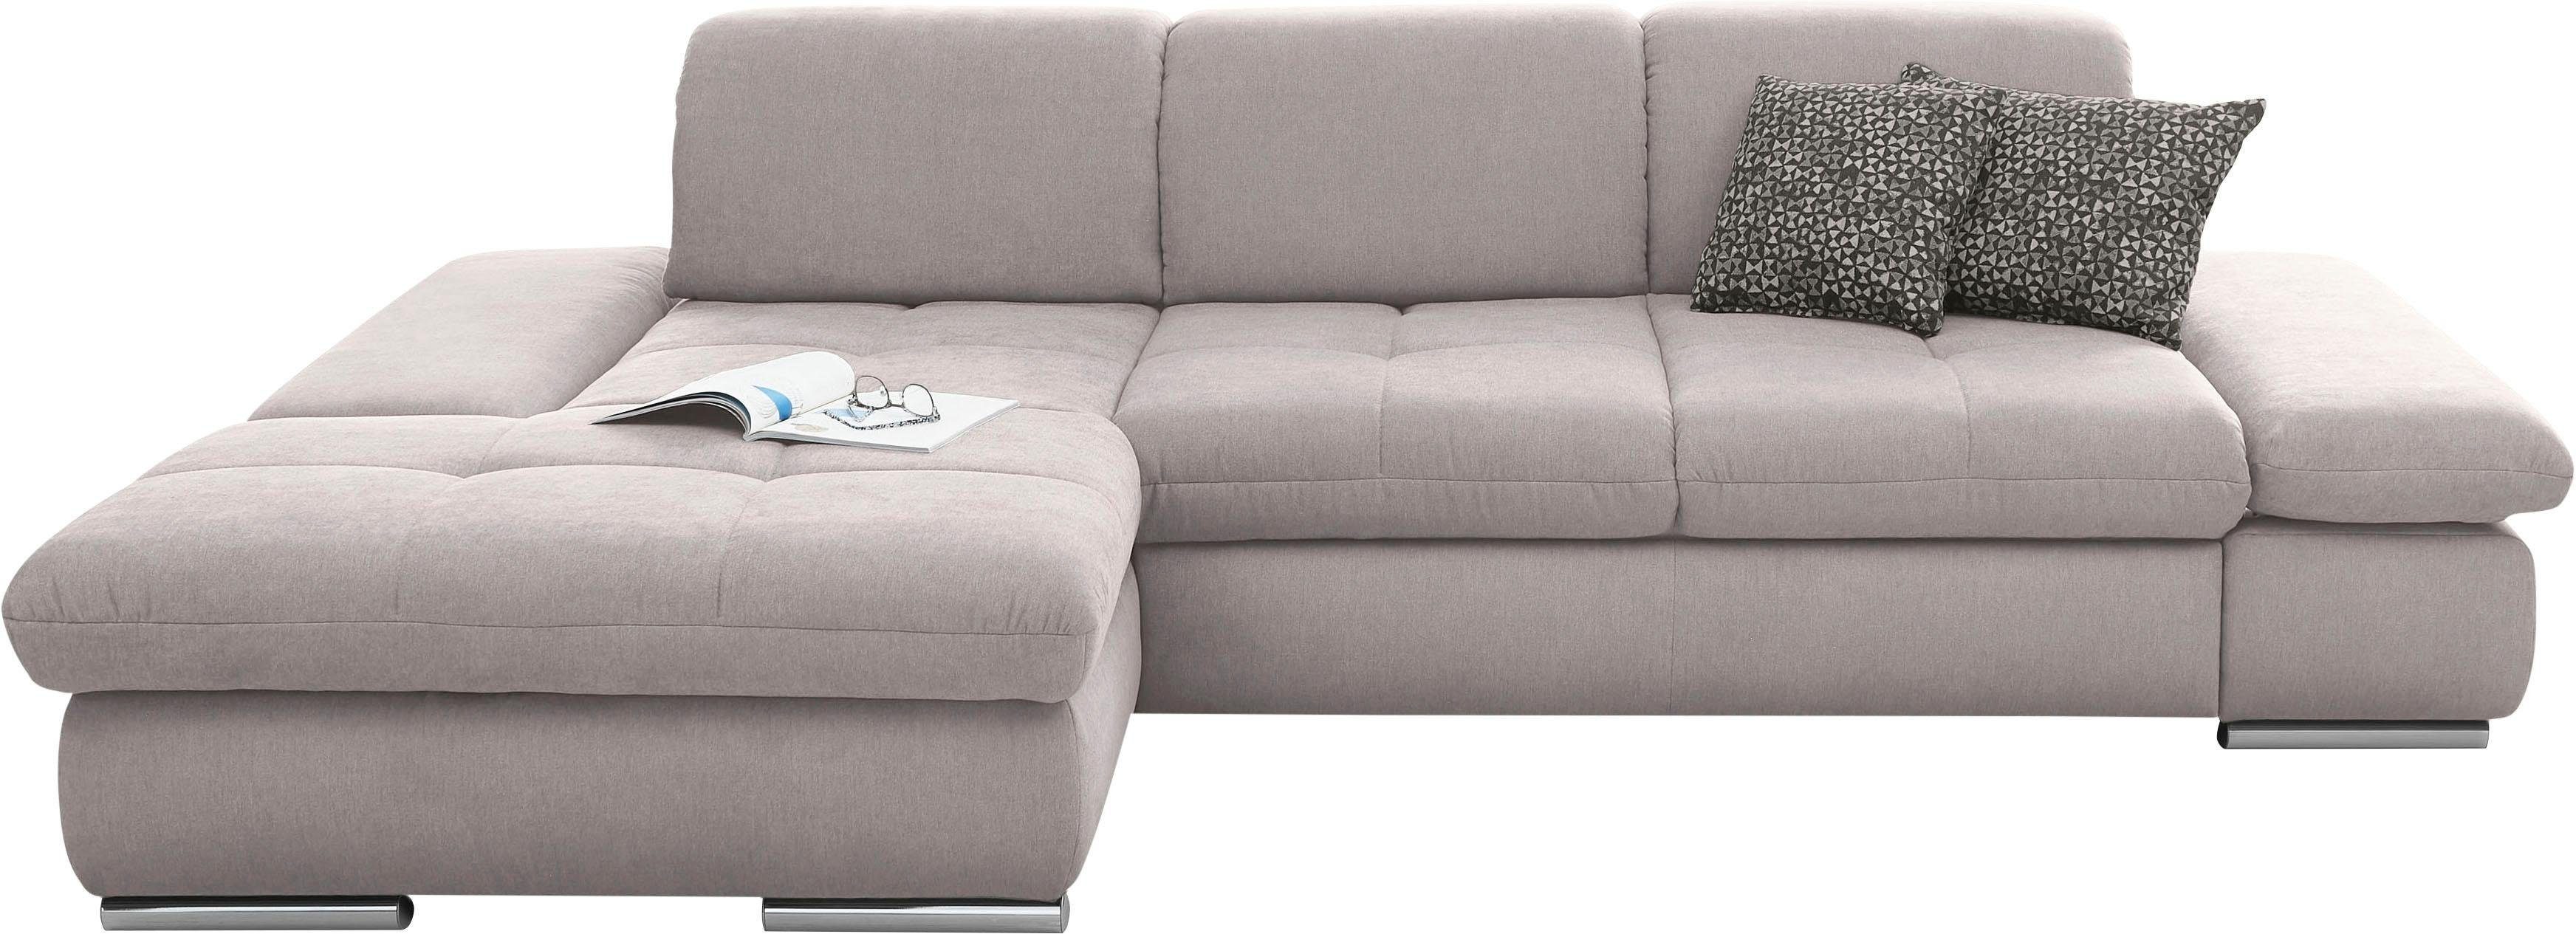 links Musterring mit 4100, Bettfunktion by one oder SO Recamiere set rechts, wahlweise Ecksofa